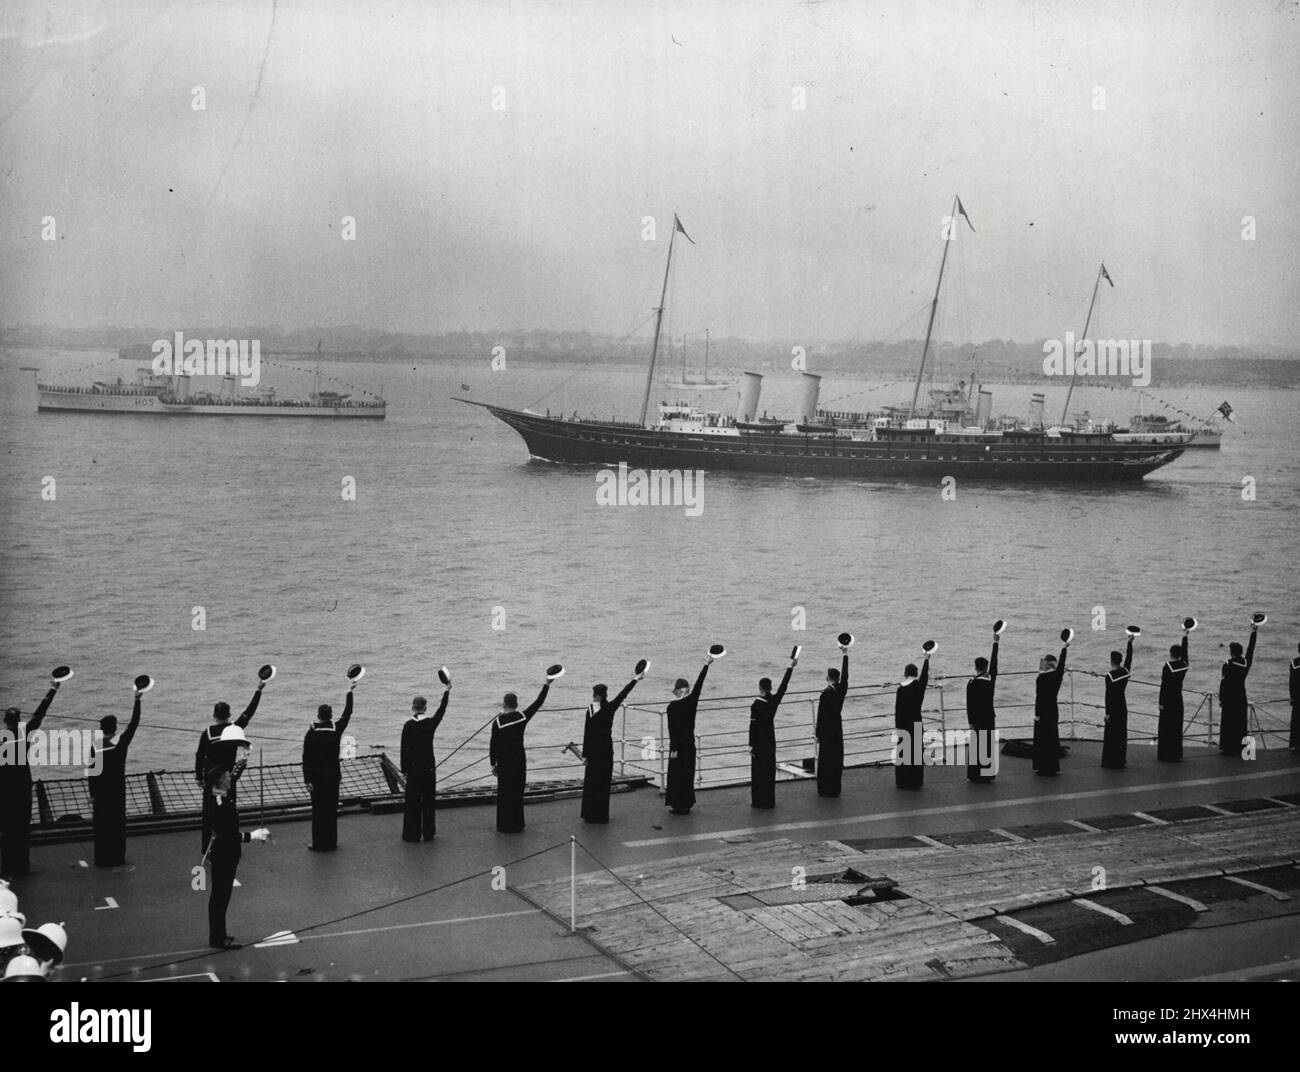 The King Reviews His Fleet At Spithead - Men of the aircraft-carrier 'Glorious' cheering as the Royal yacht 'Victoria and Albert' passed down the lines. Aboard the Royal yacht 'Victoria and Albert', the King Passed through the five-mile lines of 160 warships and merchant vessels when he made his Coronation Review of the British navy and Merchantile Marine at Spithead. Nearly 300 ships, including 17 from foreign fleets were reviewed. May 20, 1937. Stock Photo